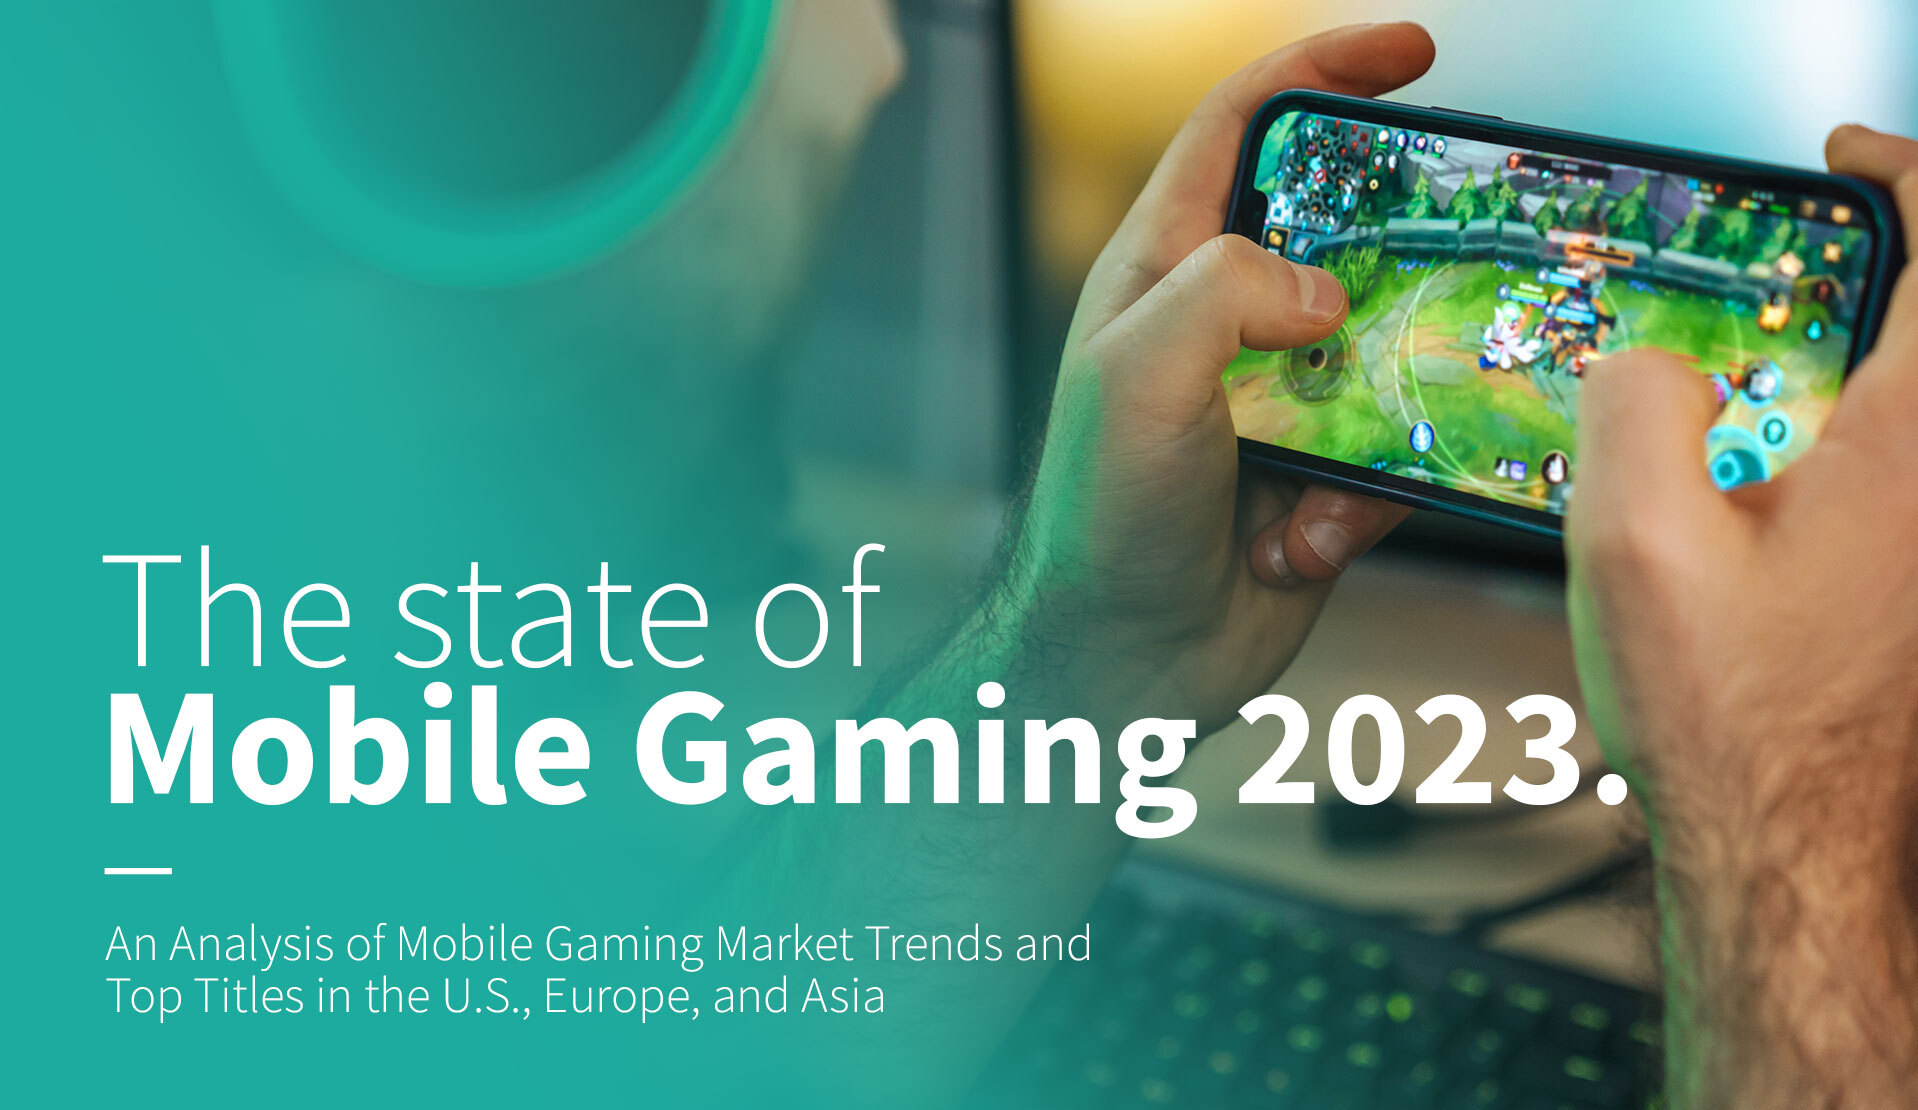 Mobile Game Features You Must Have in 2021